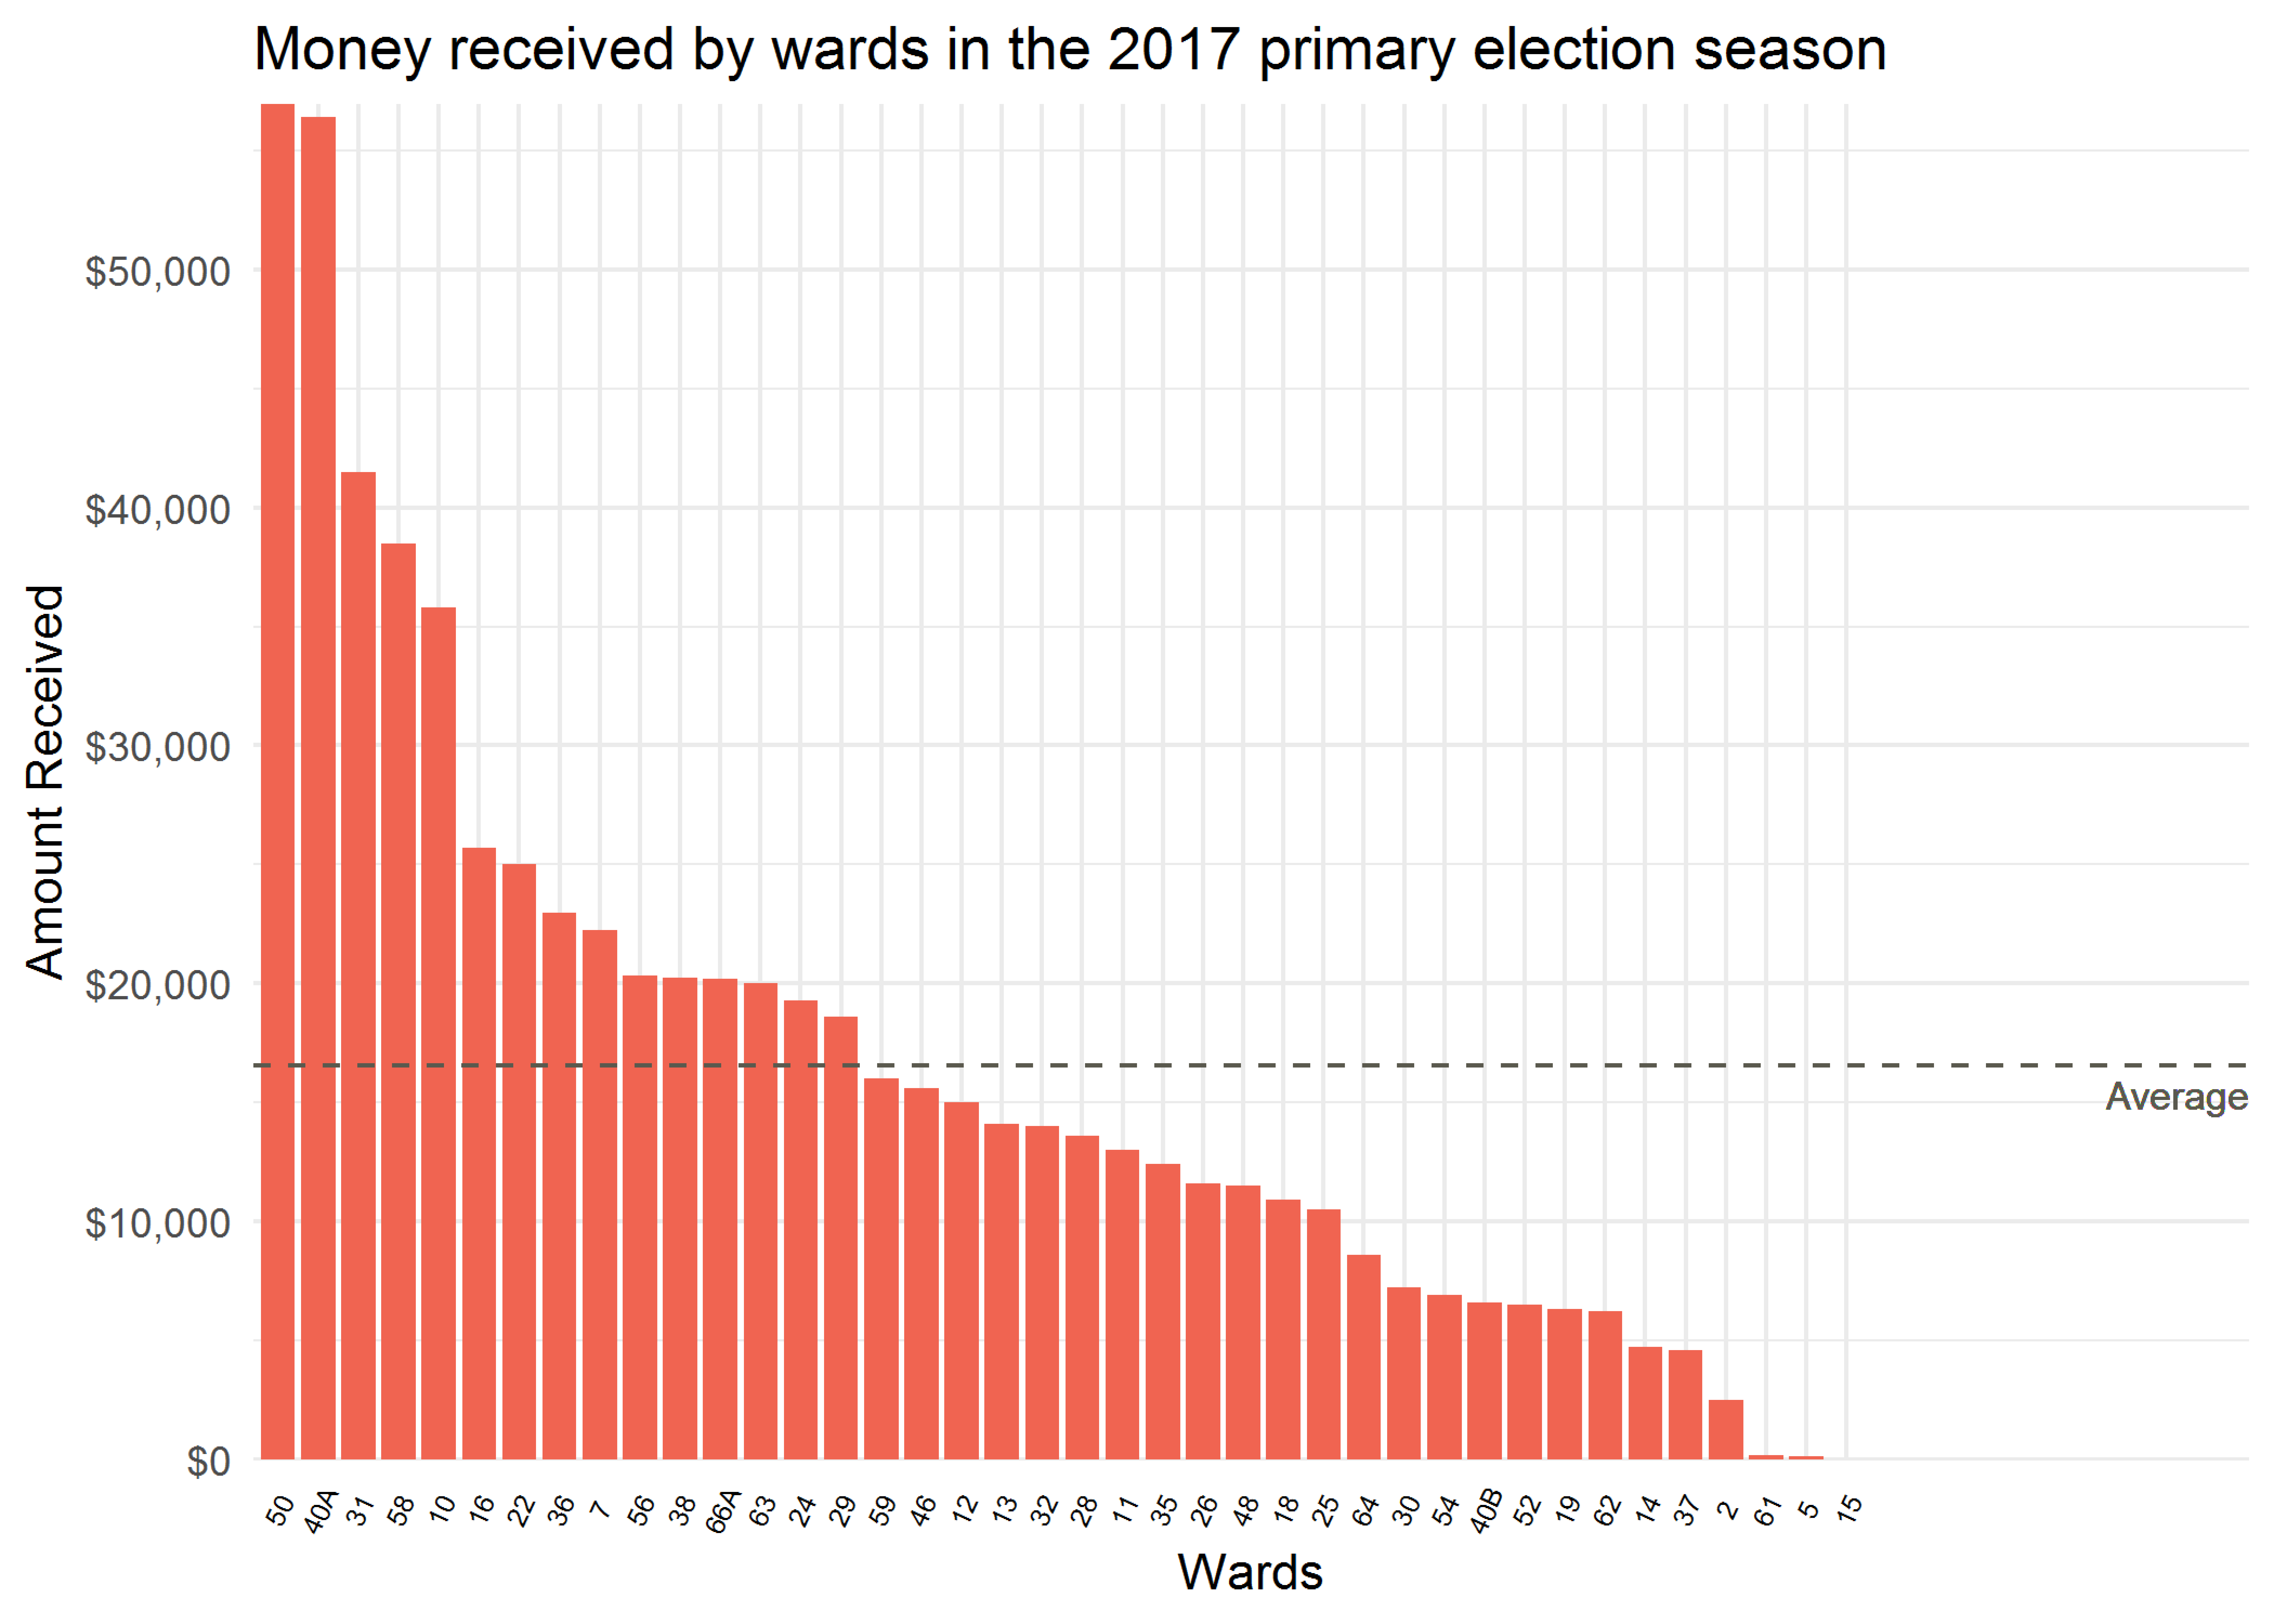 Money received by wards in the 2017 DA Primary season